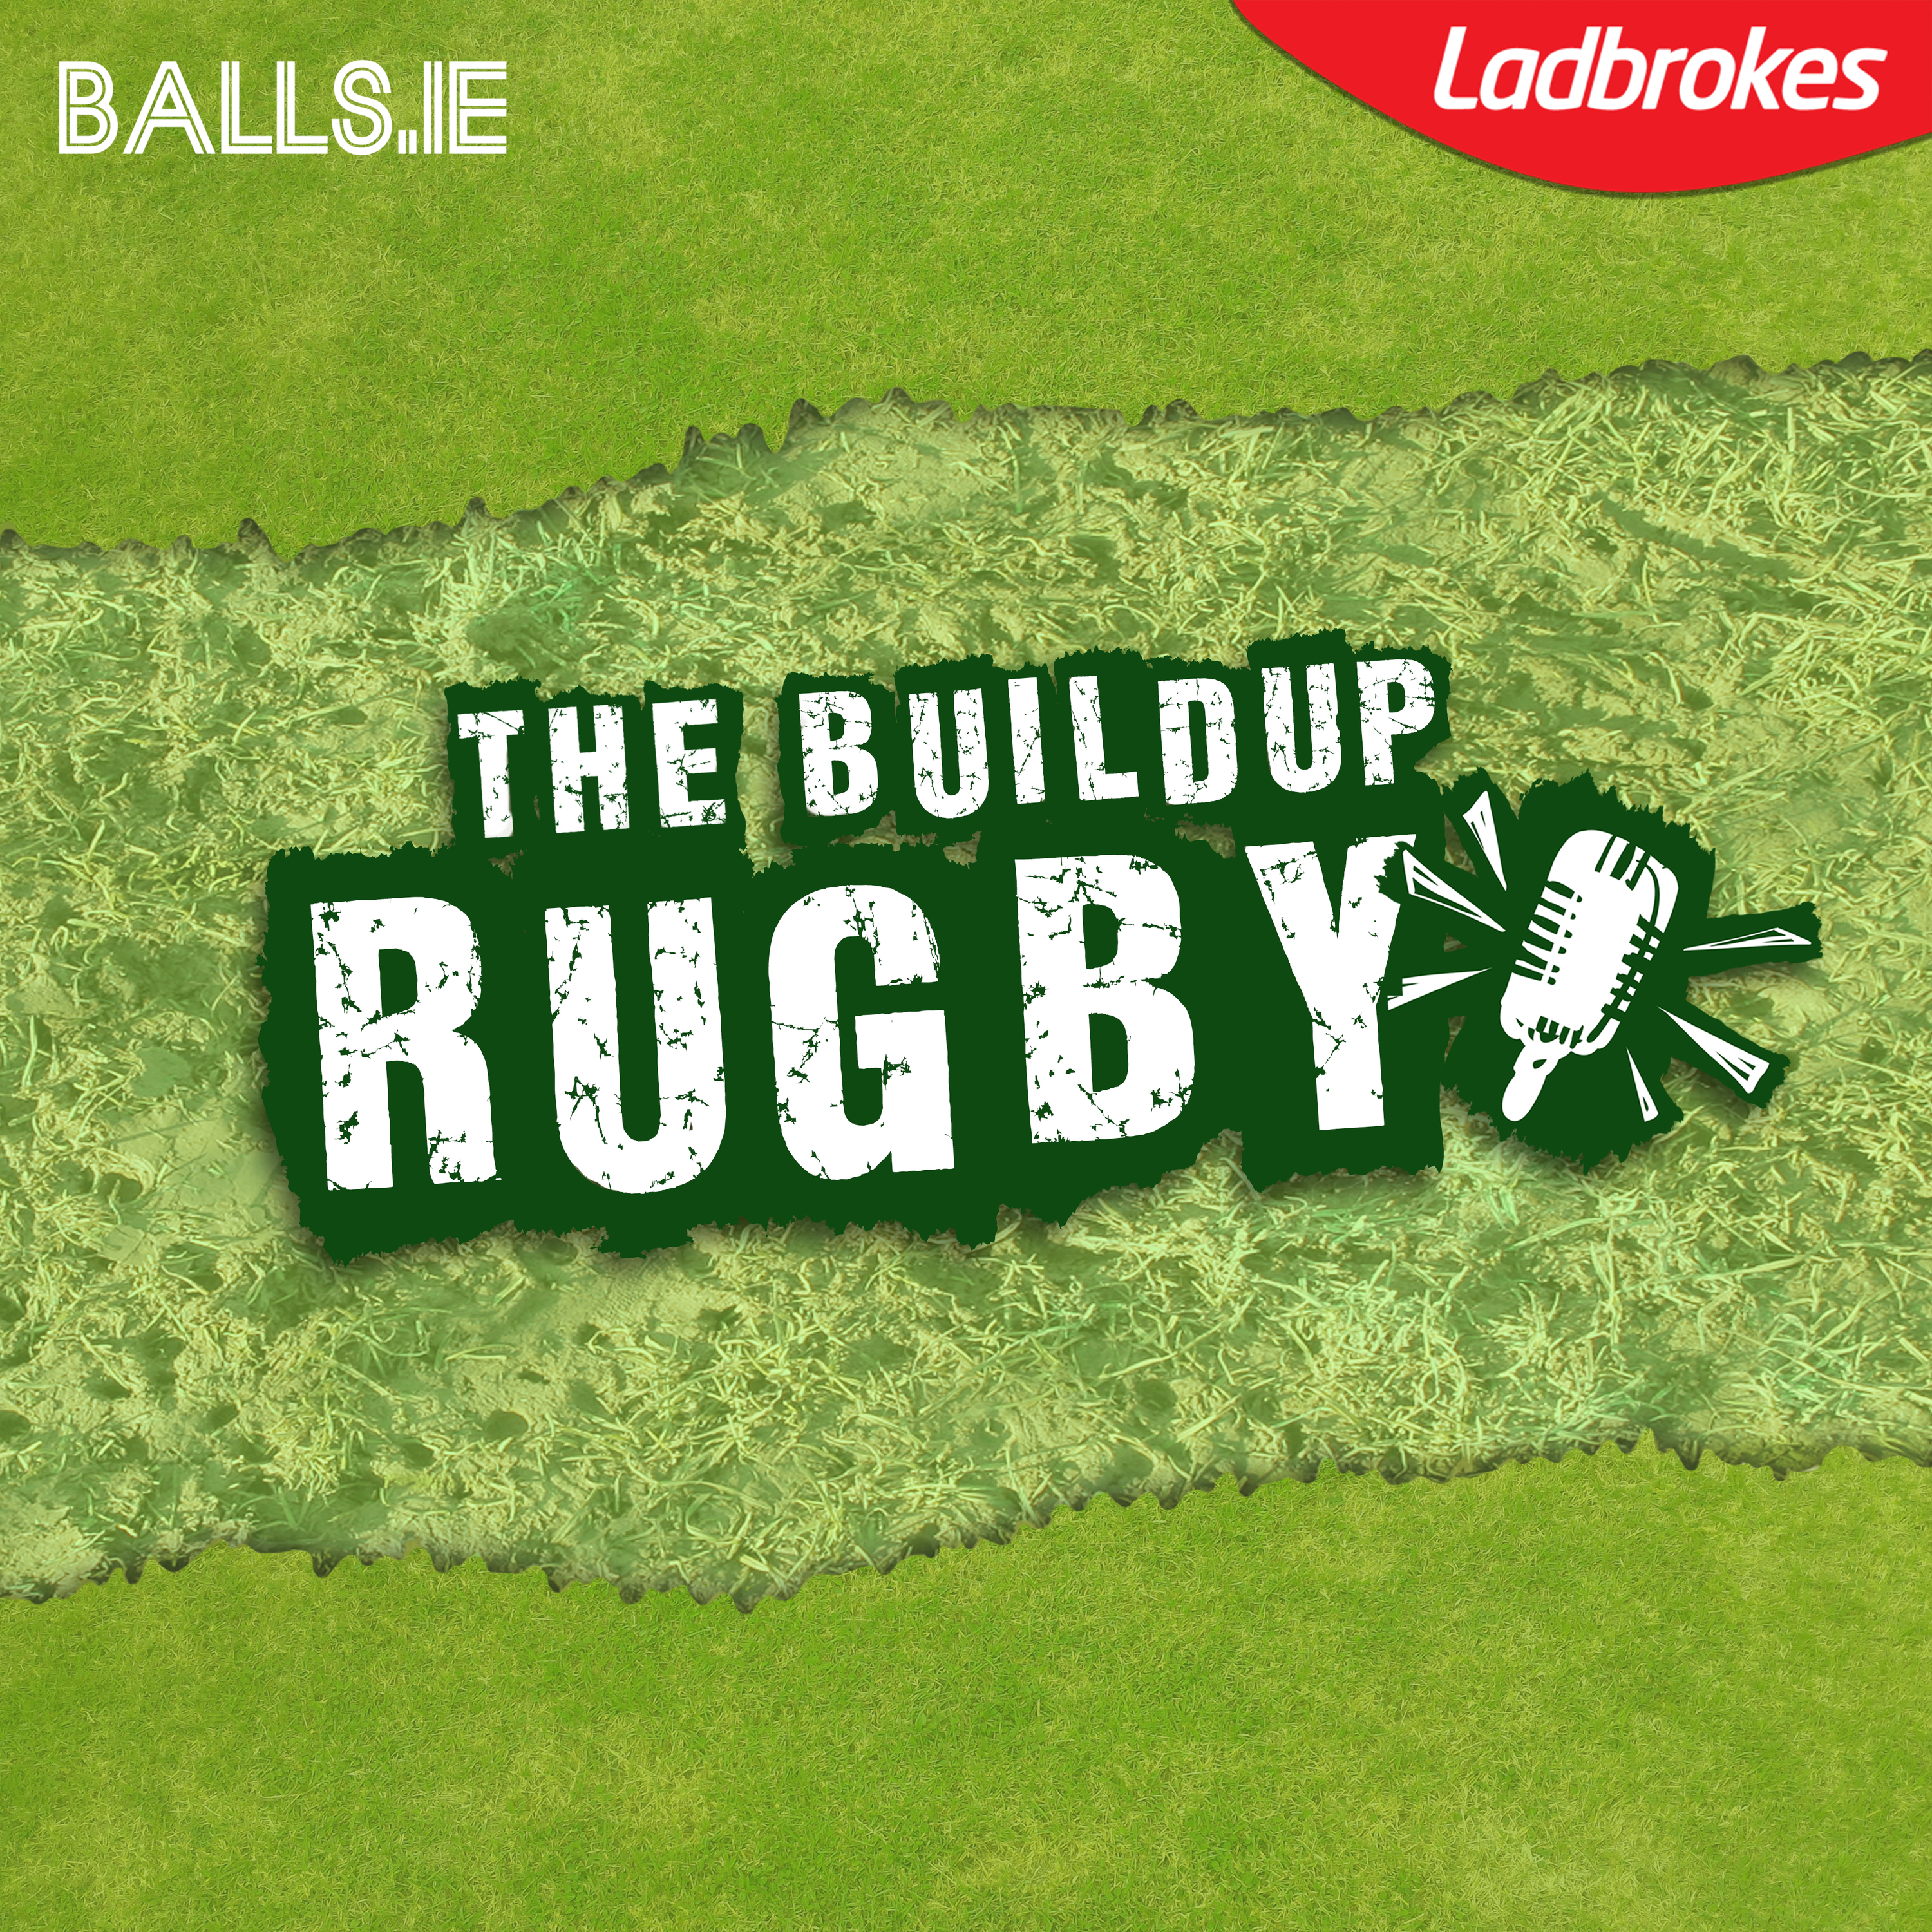 The Buildup - Leinster Vs. ROG, with Stephen Ferris